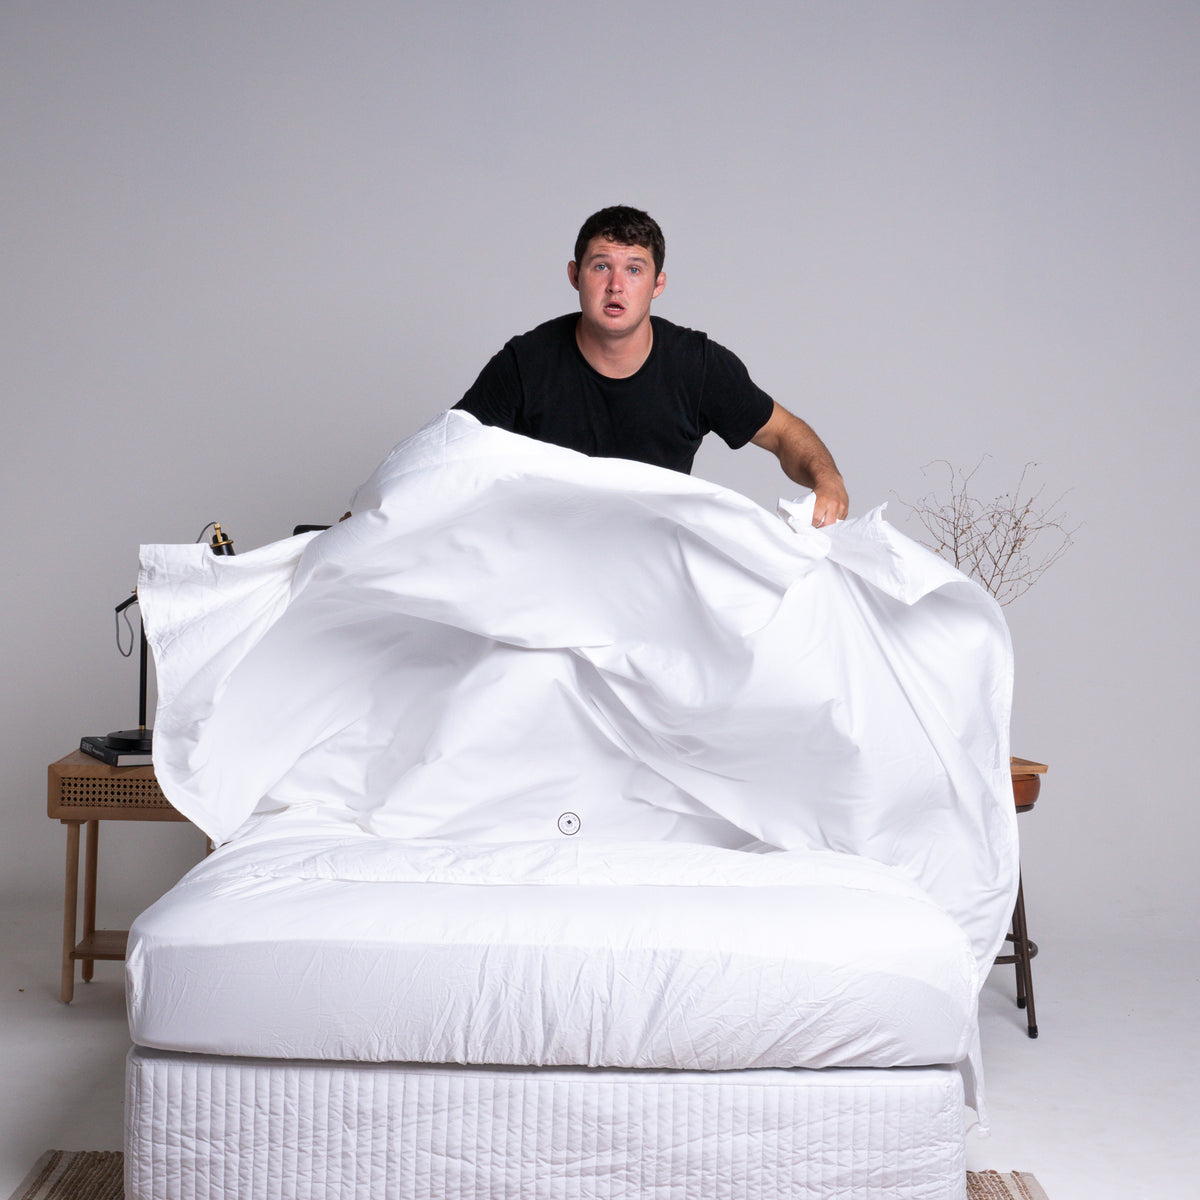 Lad Collective: Sheets that empower men to make their bed